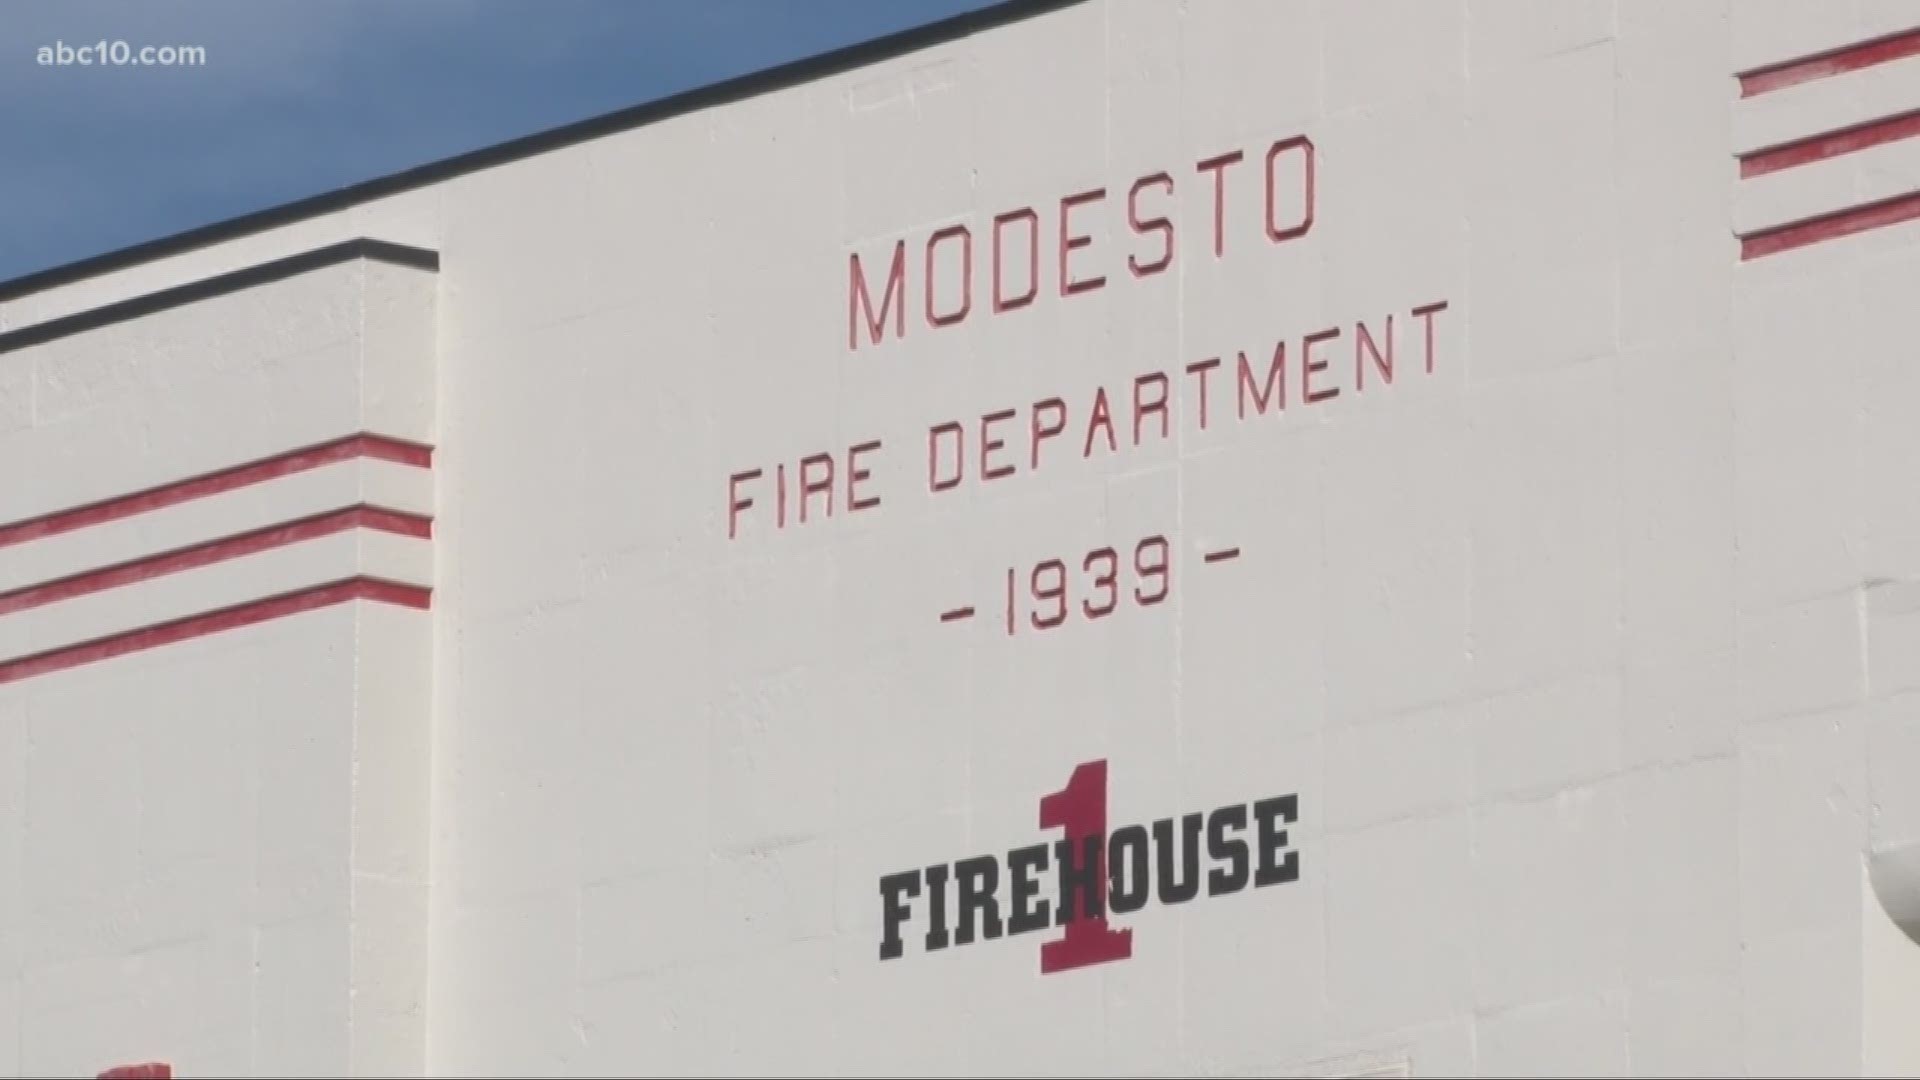 Modesto's busiest fire station is falling apart. It's gotten to the point where the city has made the choice to move their firefighters out of the building and into the administration building next door.